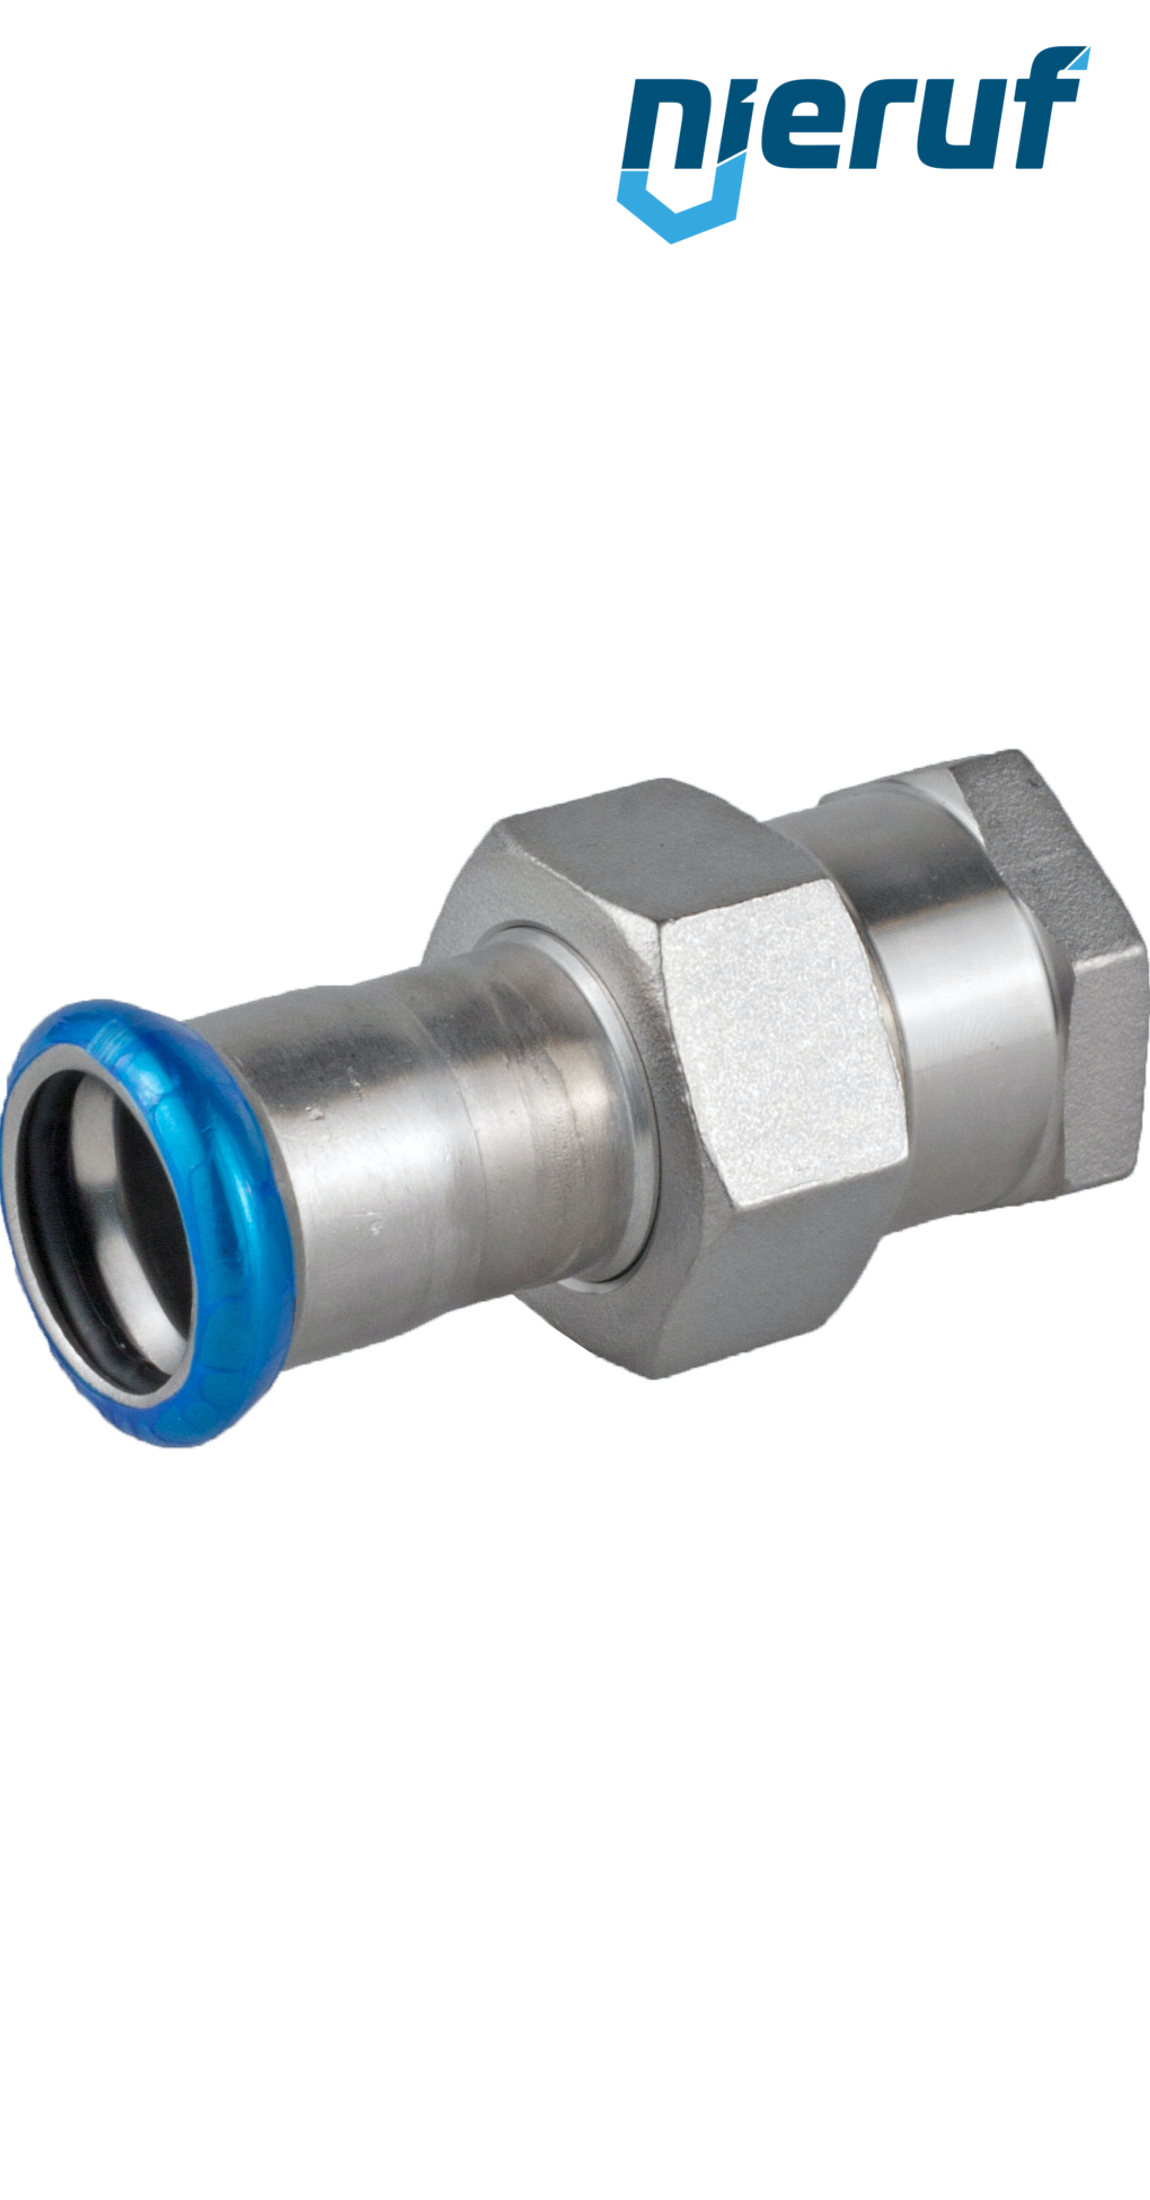 Union Coupling Pressfitting F DN50 - 54,0 mm female thread 2" inch stainless steel